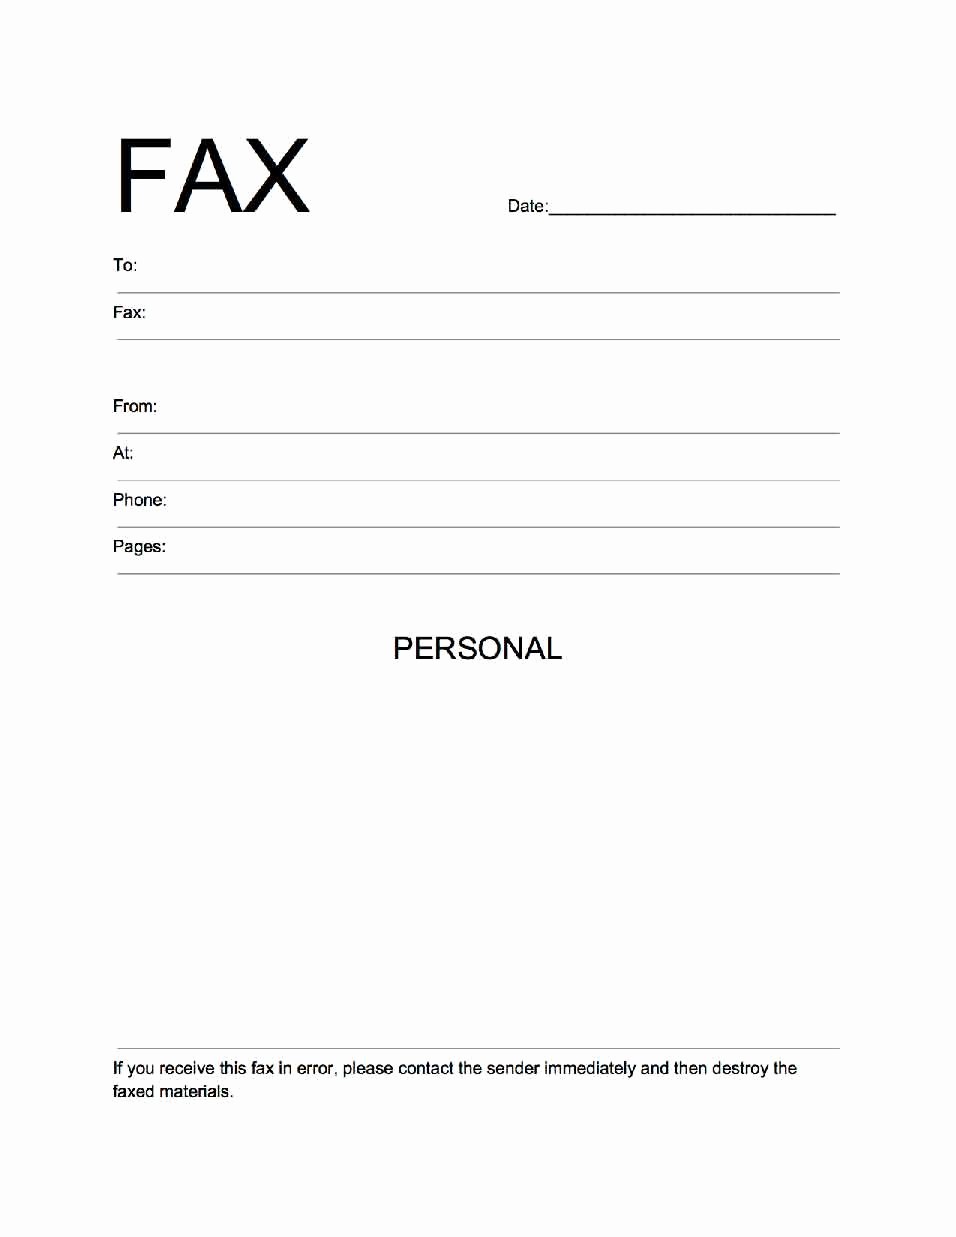 Cover Sheet for Fax Example Best Of Personal Fax Cover Sheet Template